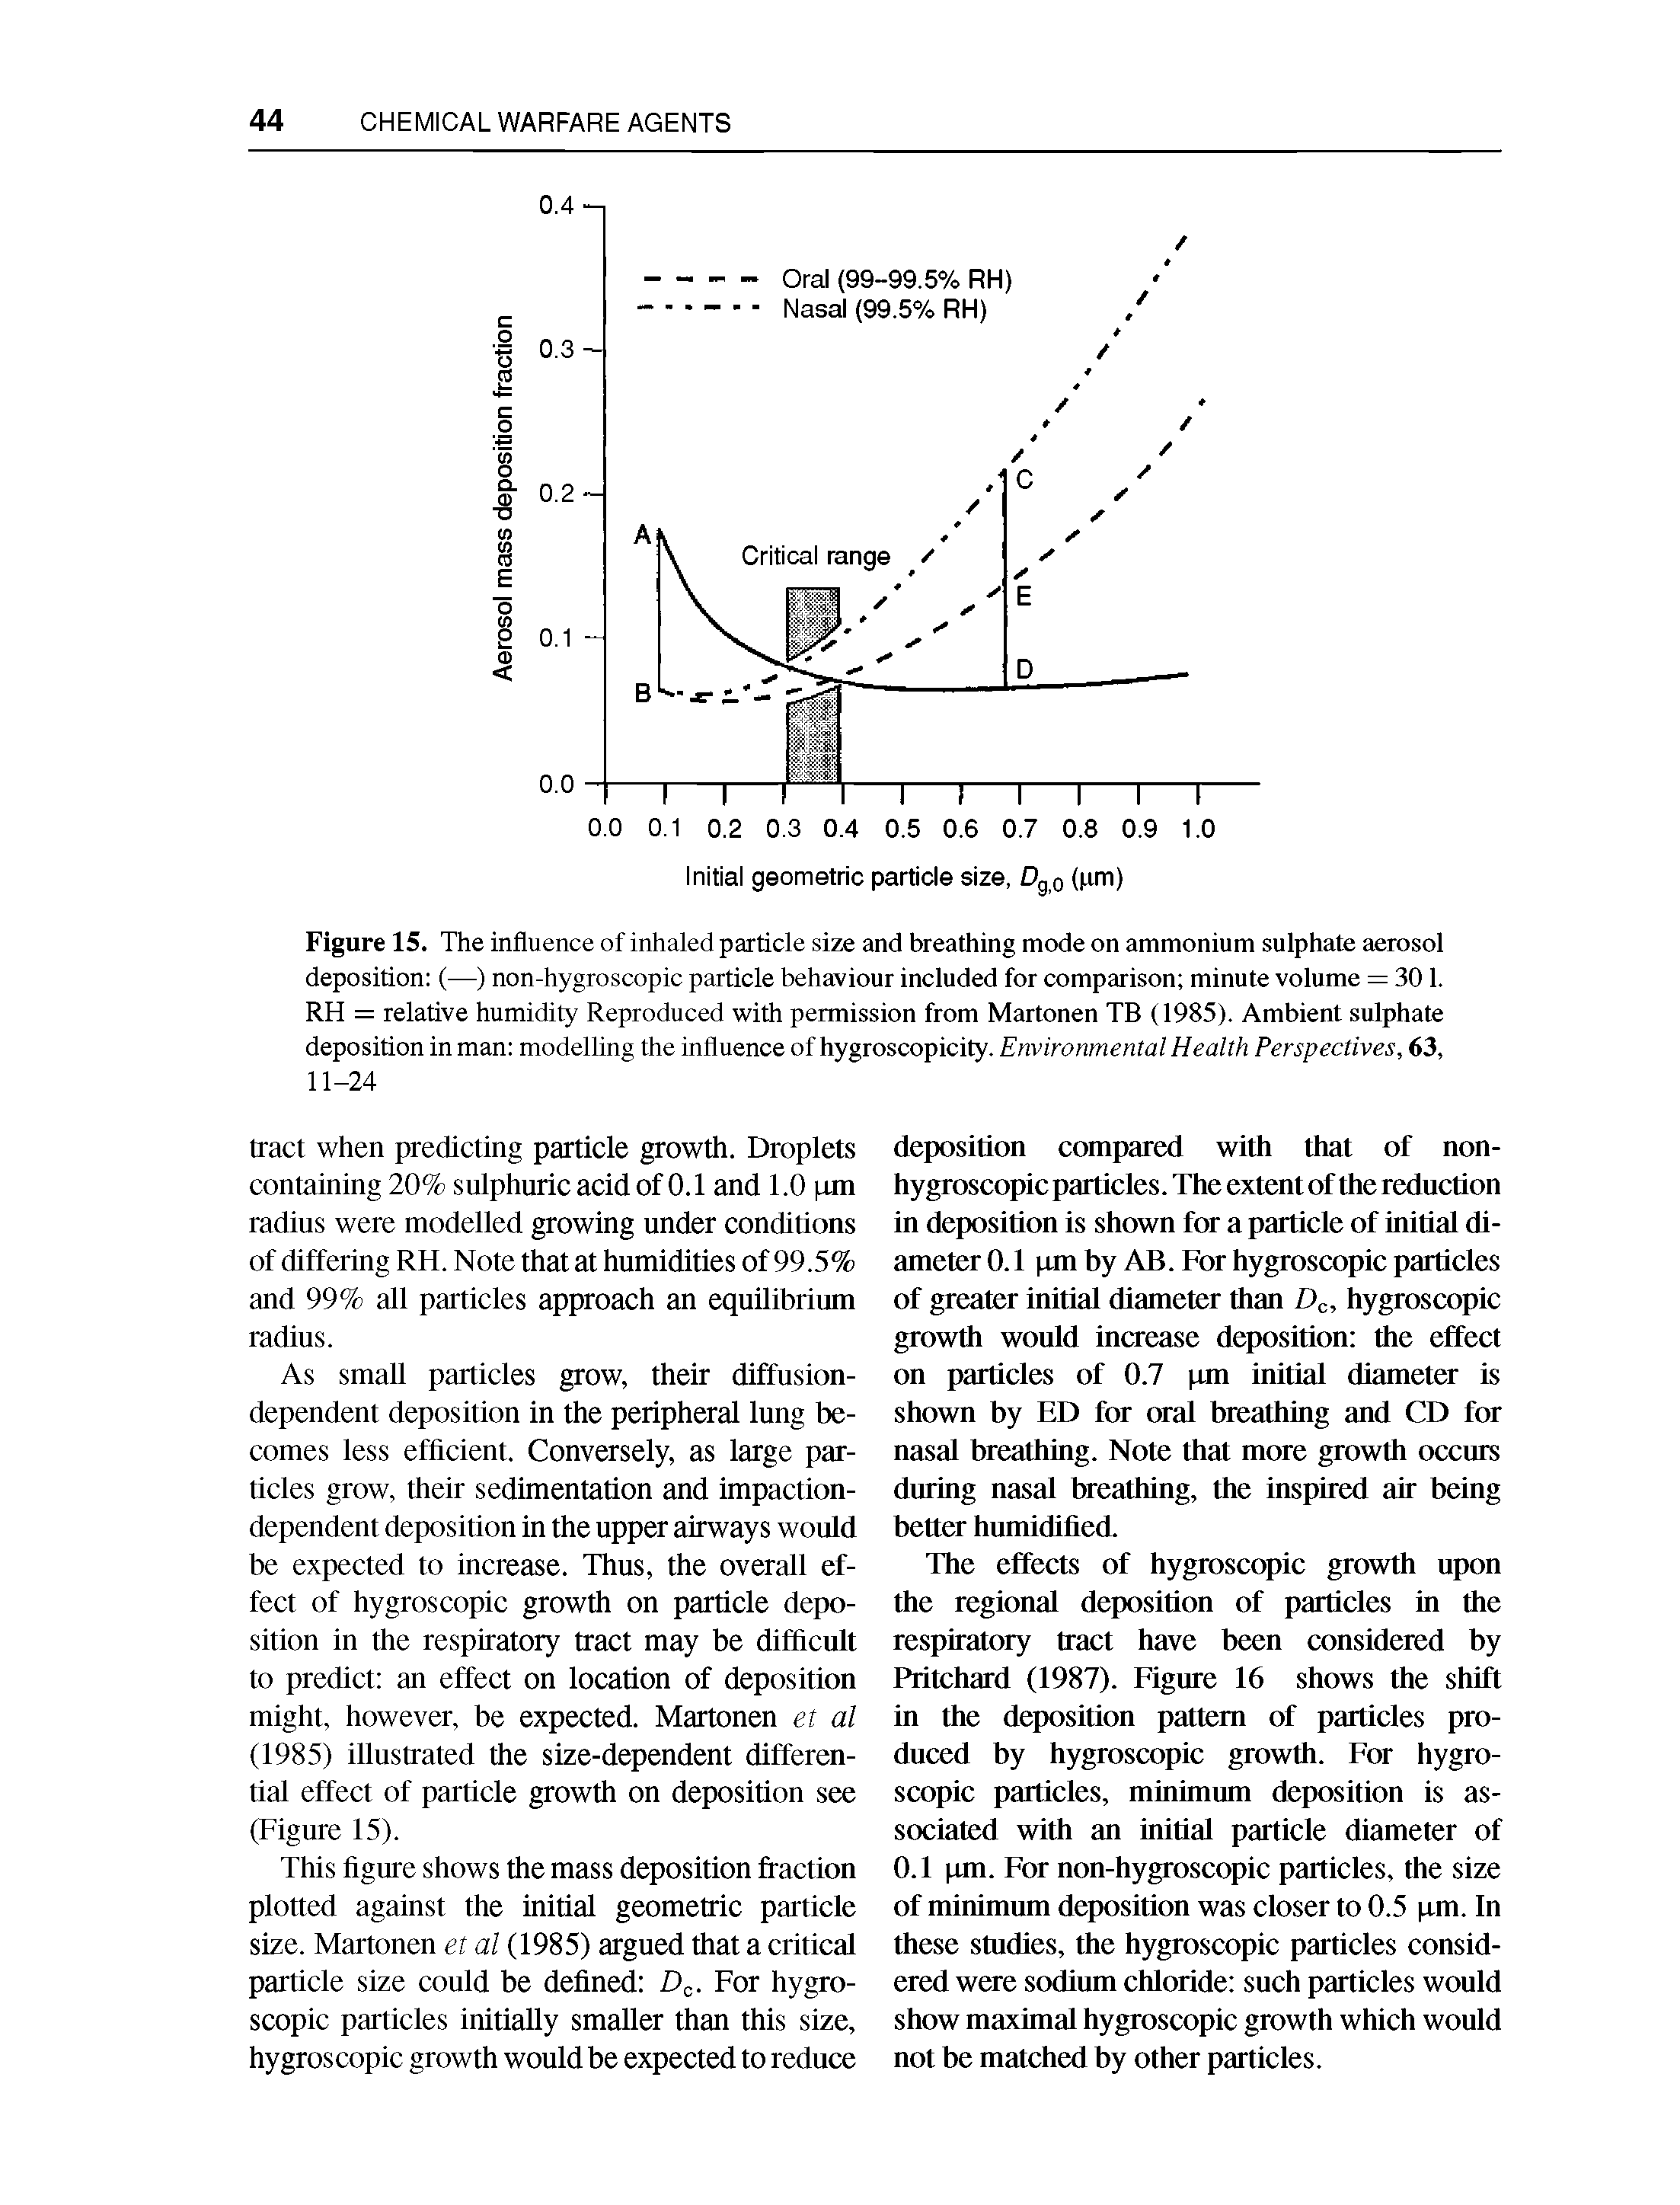 Figure 15. The influence of inhaled particle size and breathing mode on ammonium sulphate aerosol deposition (—) non-hygroscopic particle behaviour included for comparison minute volume = 30 1. RH = relative humidity Reproduced with permission from Martonen TB (1985). Ambient sulphate deposition in man modelling the influence of hygroscopicity. Environmental Health Perspectives, 63, 11-24...